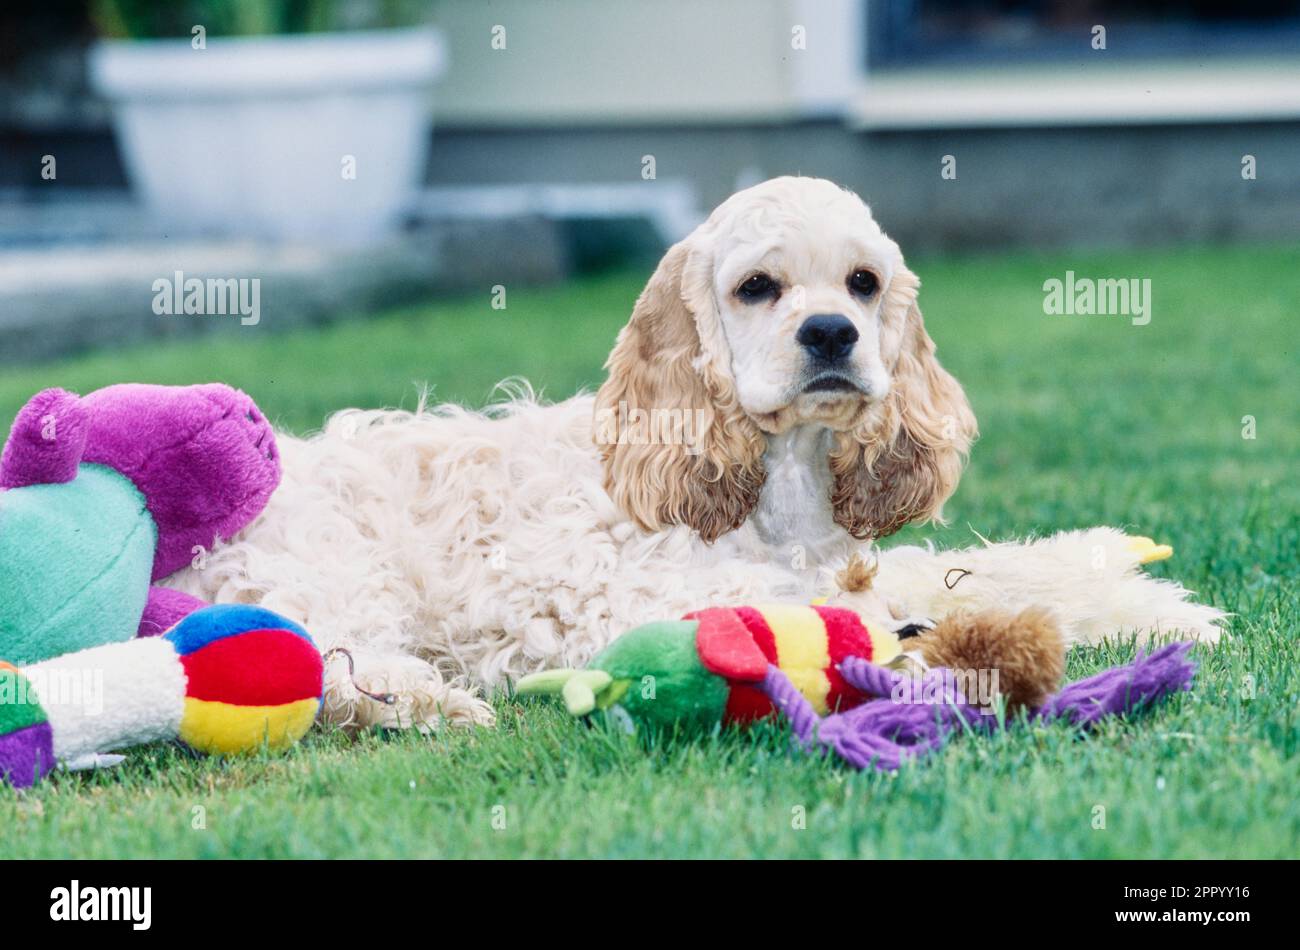 American Cocker Spaniel laying down in grass outside with chew toys Stock Photo